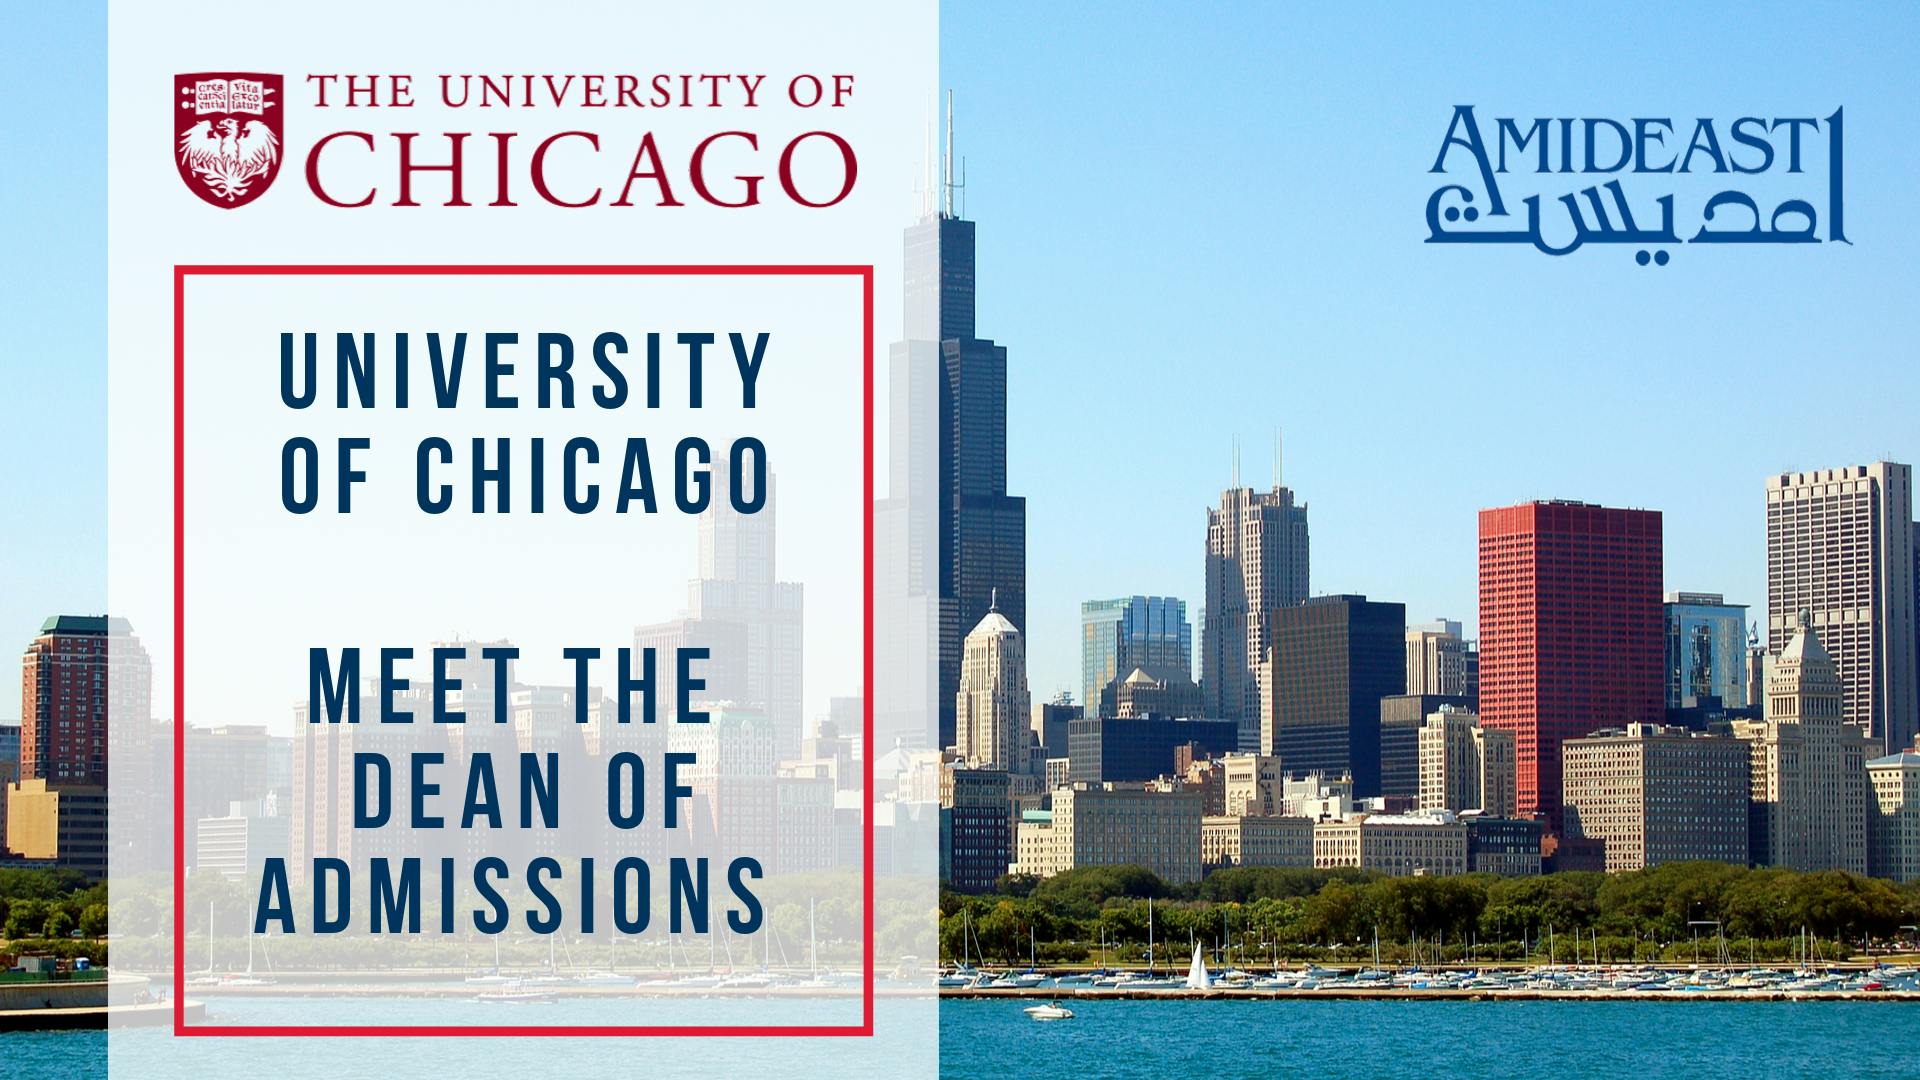 University of Chicago - All You Need to Know About Admissions